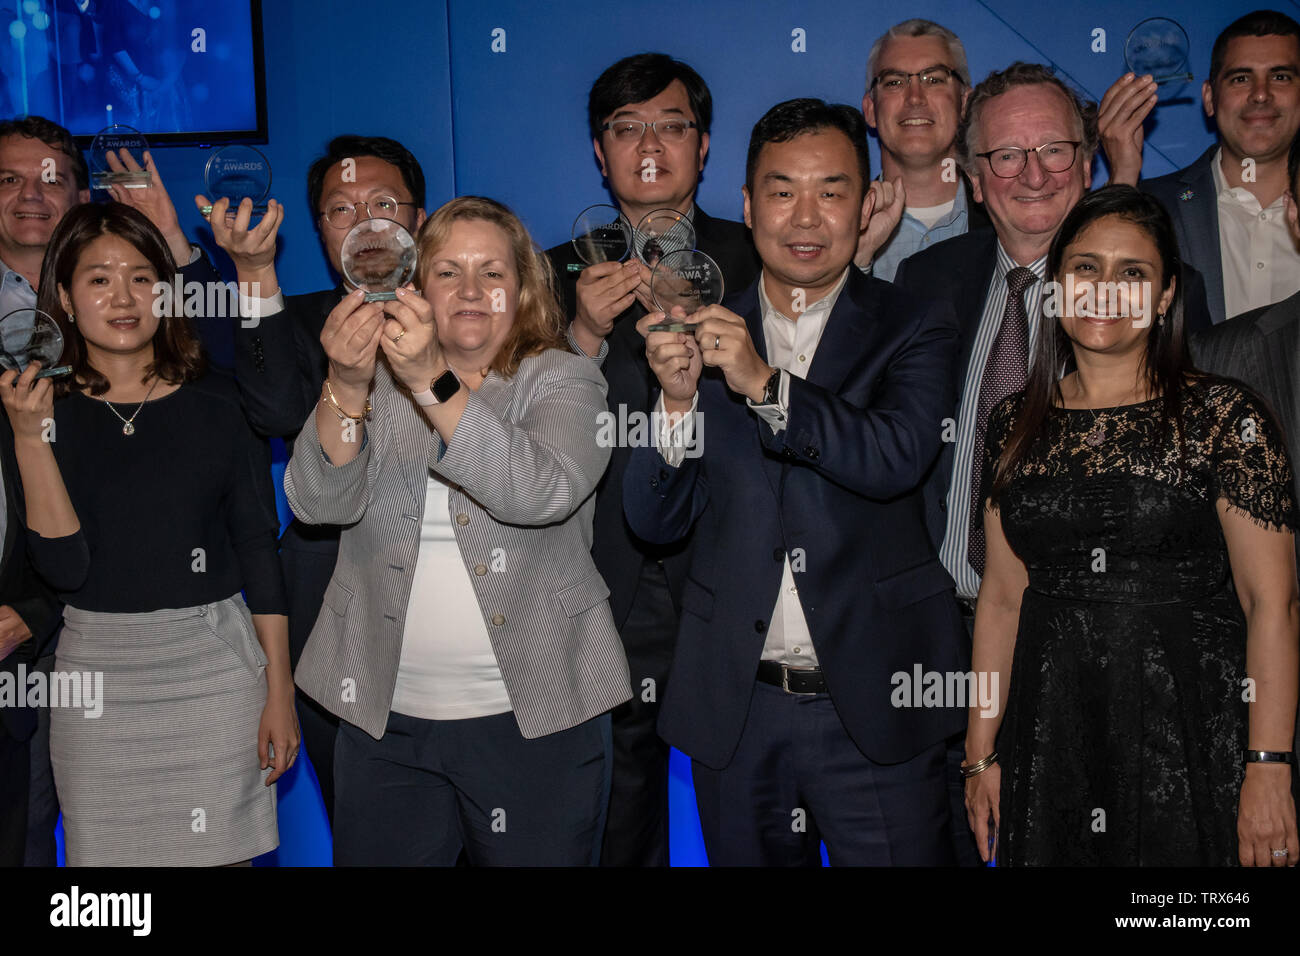 London, UK. 12th June, 2019. 5G Awards ceremony at Drapers’ Hall, on 12 June 2019, London, UK. Credit: Picture Capital/Alamy Live News Stock Photo